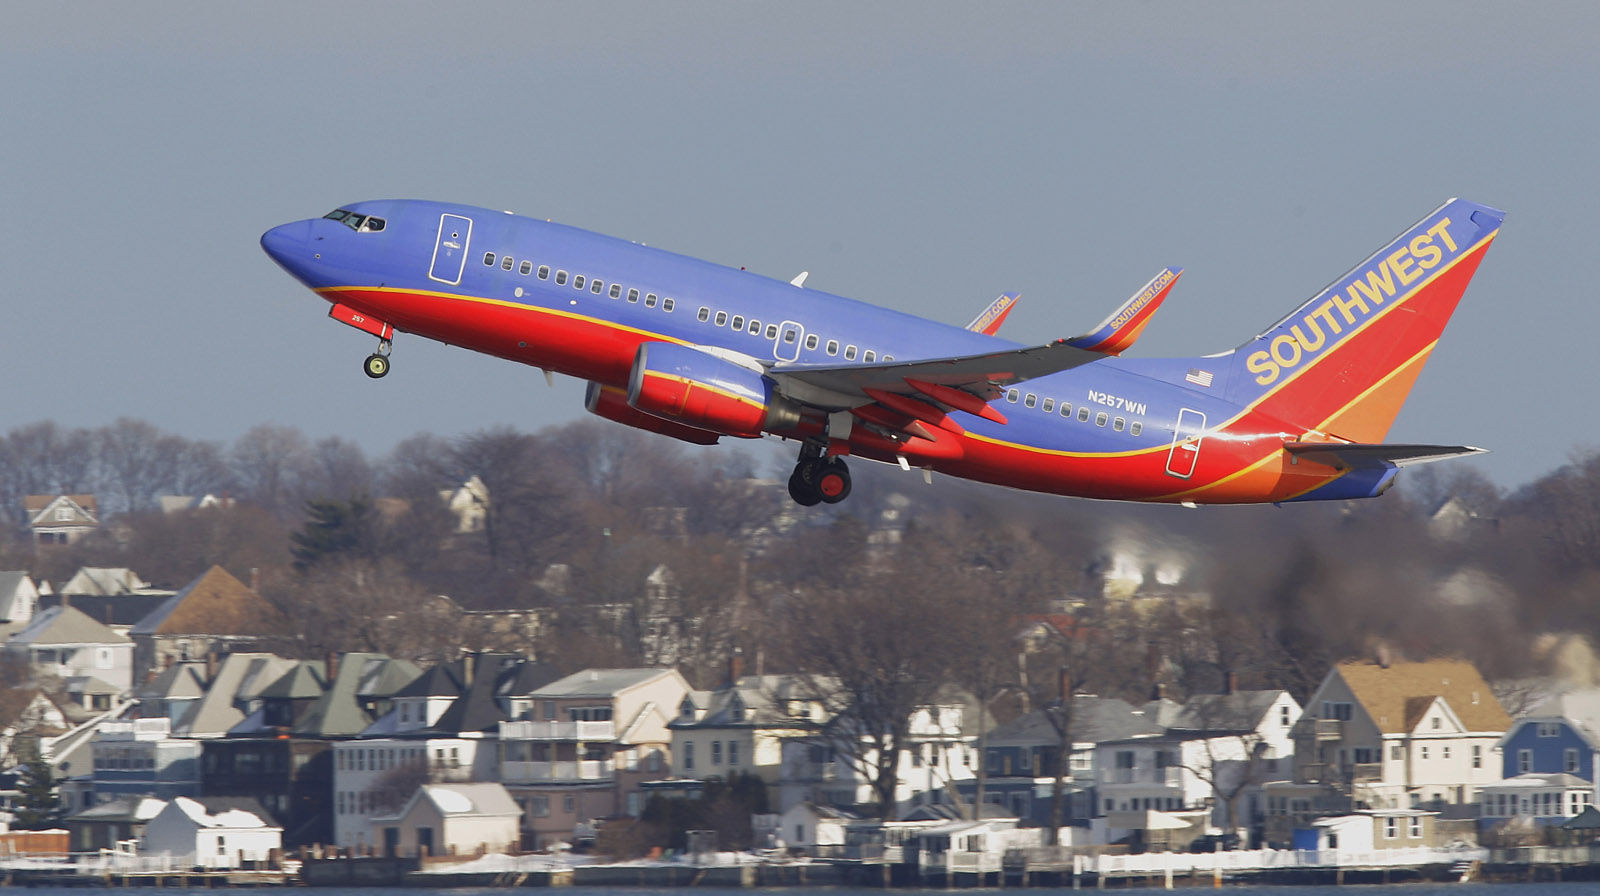 Southwest Airlines came in third. While the airline was sixth in on-time arrivals, it scored well by having the fewest extreme delays and complaints by customers. File. (AP Photo/Stephan Savoia)